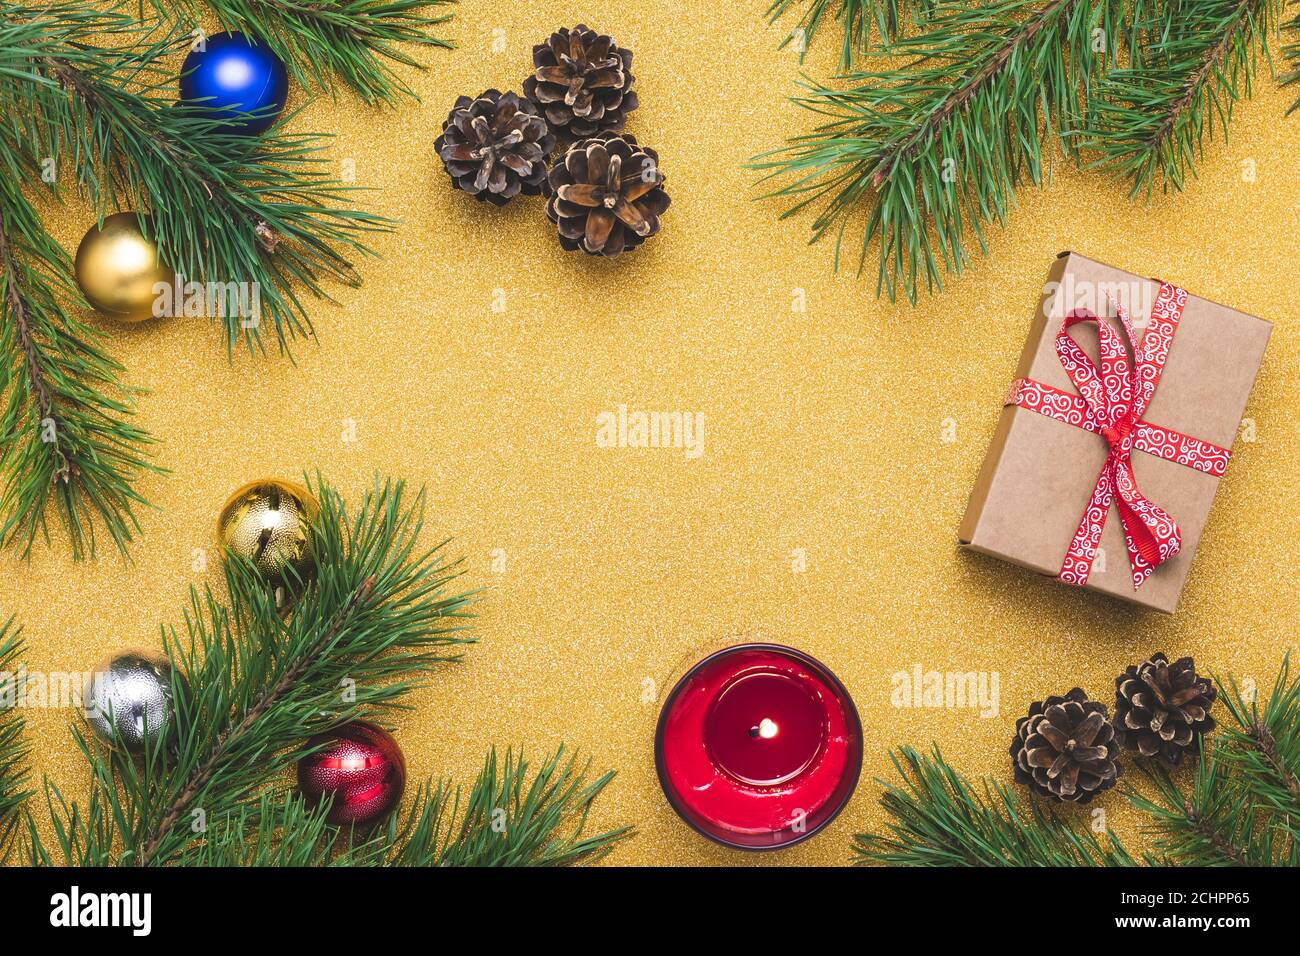 Golden Christmas background with pine tree branches and holiday decorations. Still life. Bright yellow flat composition. Celebration frame border, moc Stock Photo